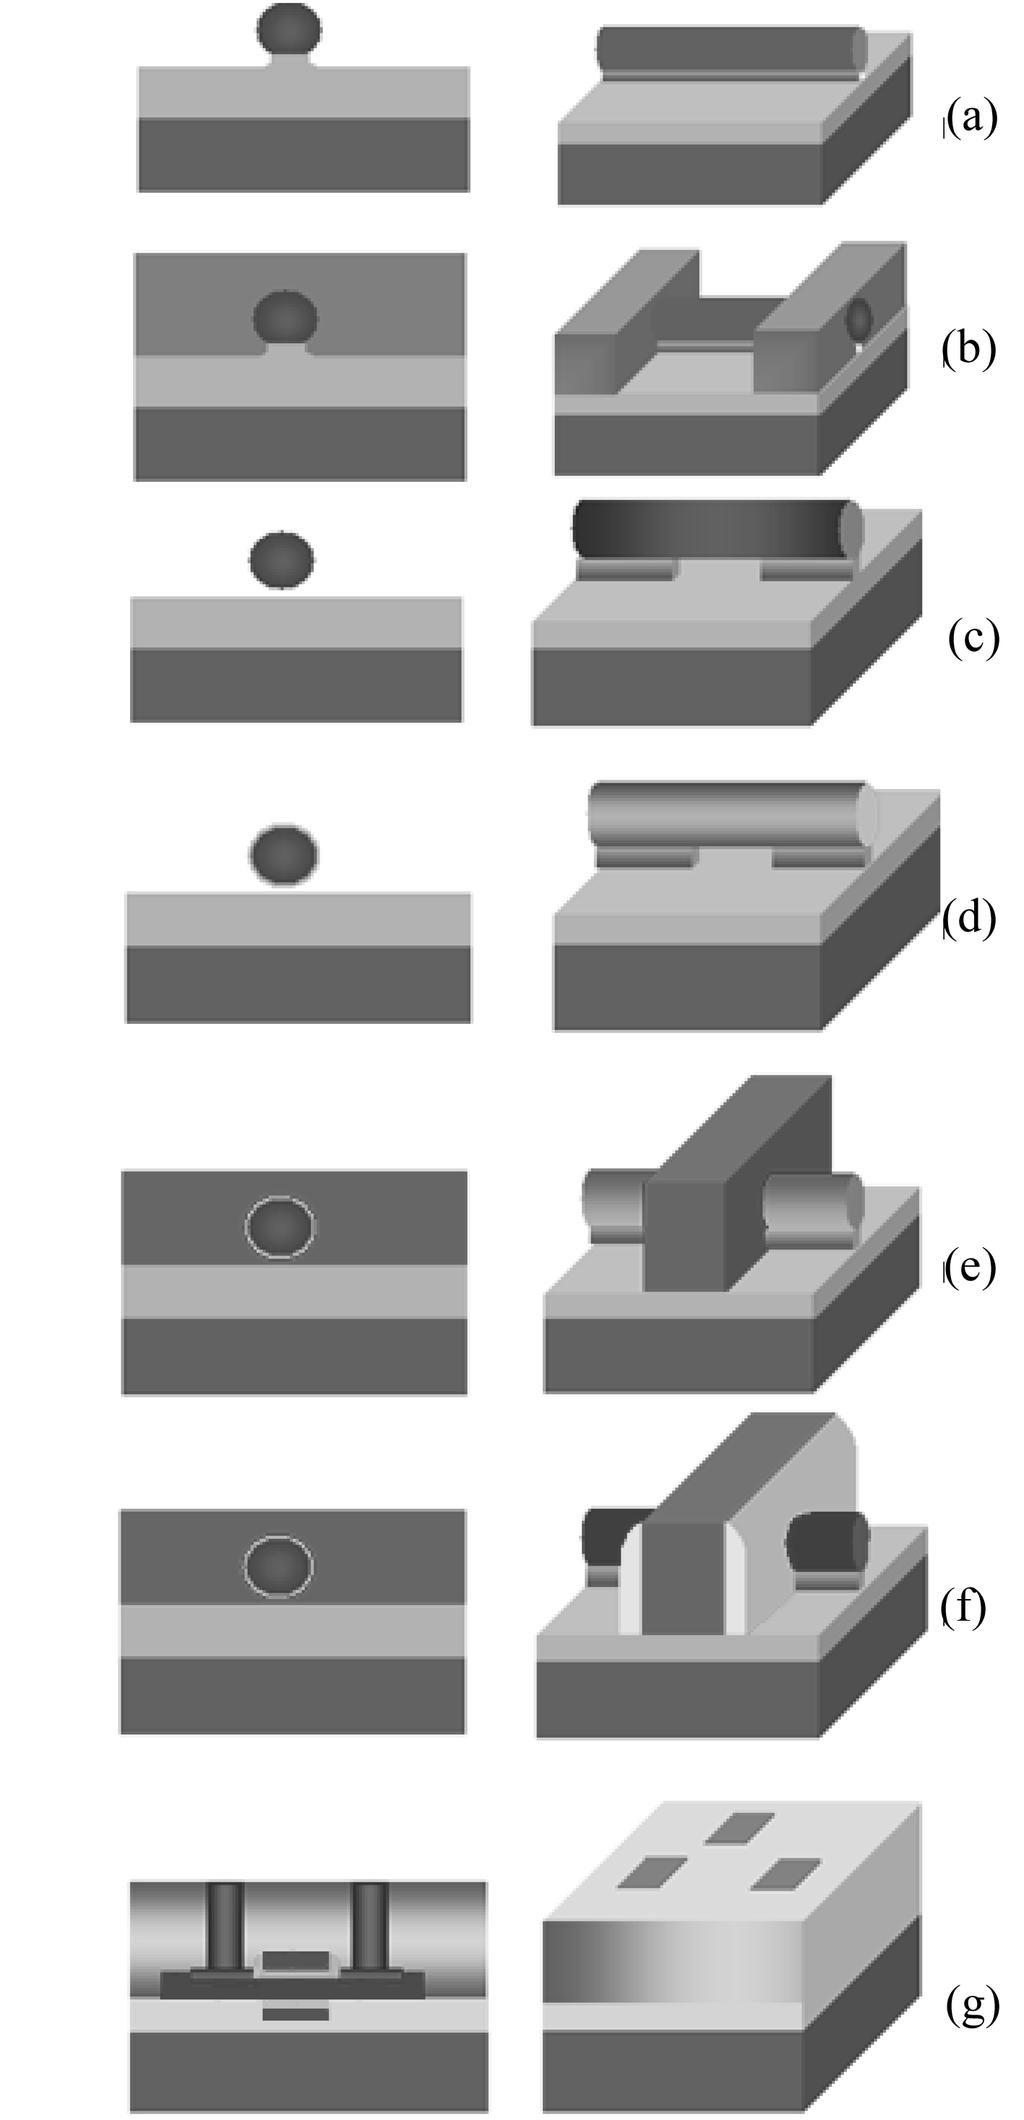 Process flow for GAAC FinFET illustrated in cross-sectional and perspective views: (a) Define silicon fin by lithography and silicon active area etch (dry and wet etch); (b) Define the pattern by